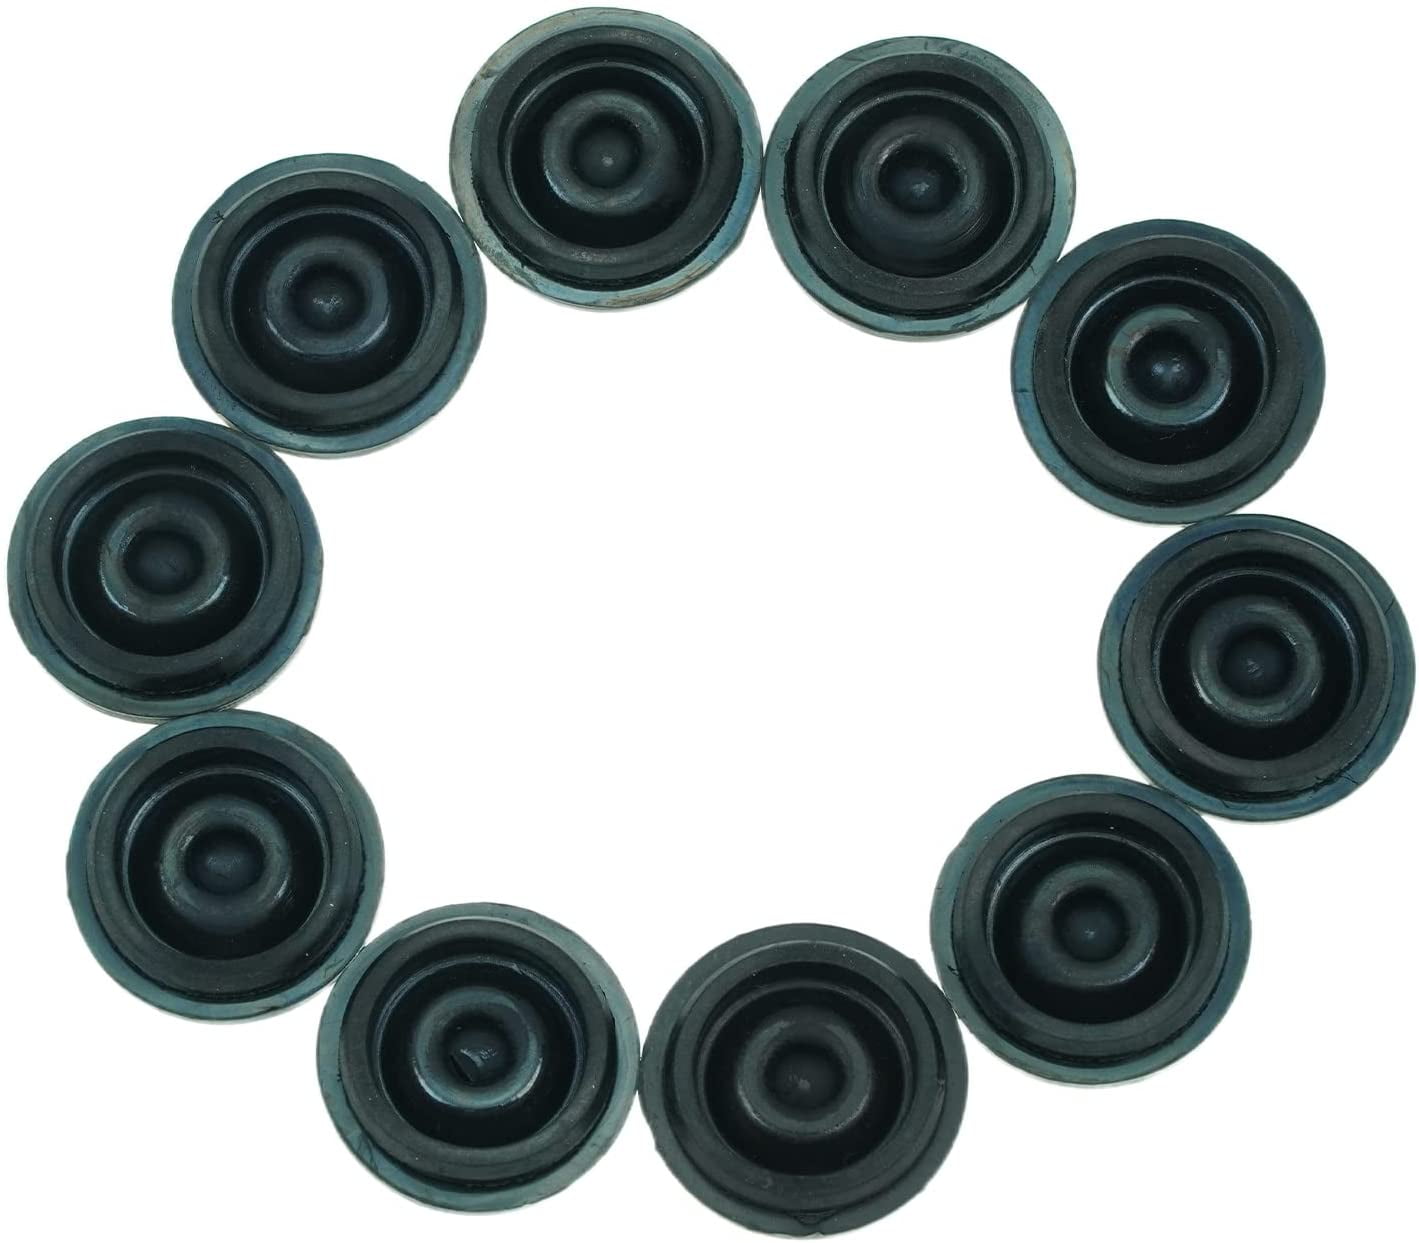 4 New Rubber Grease Plugs for Hub Dust Caps for Dexter EZ Lube Trailer Camper Axle 